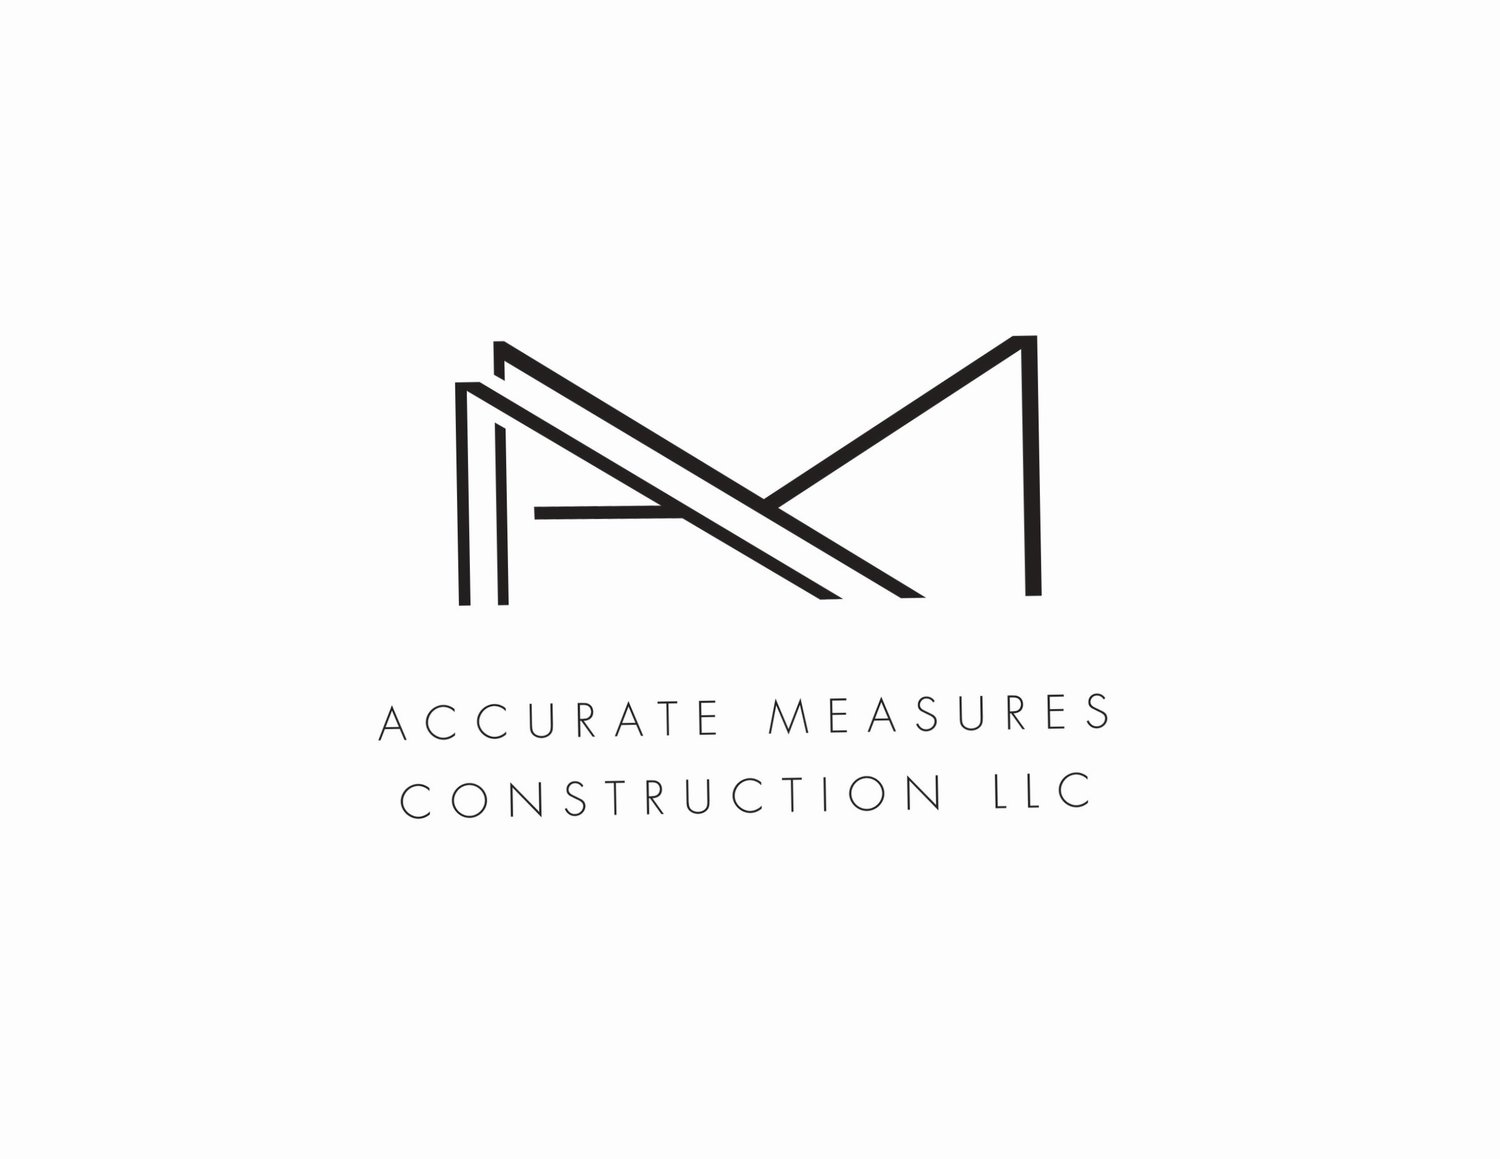 Accurate Measures Construction LLC